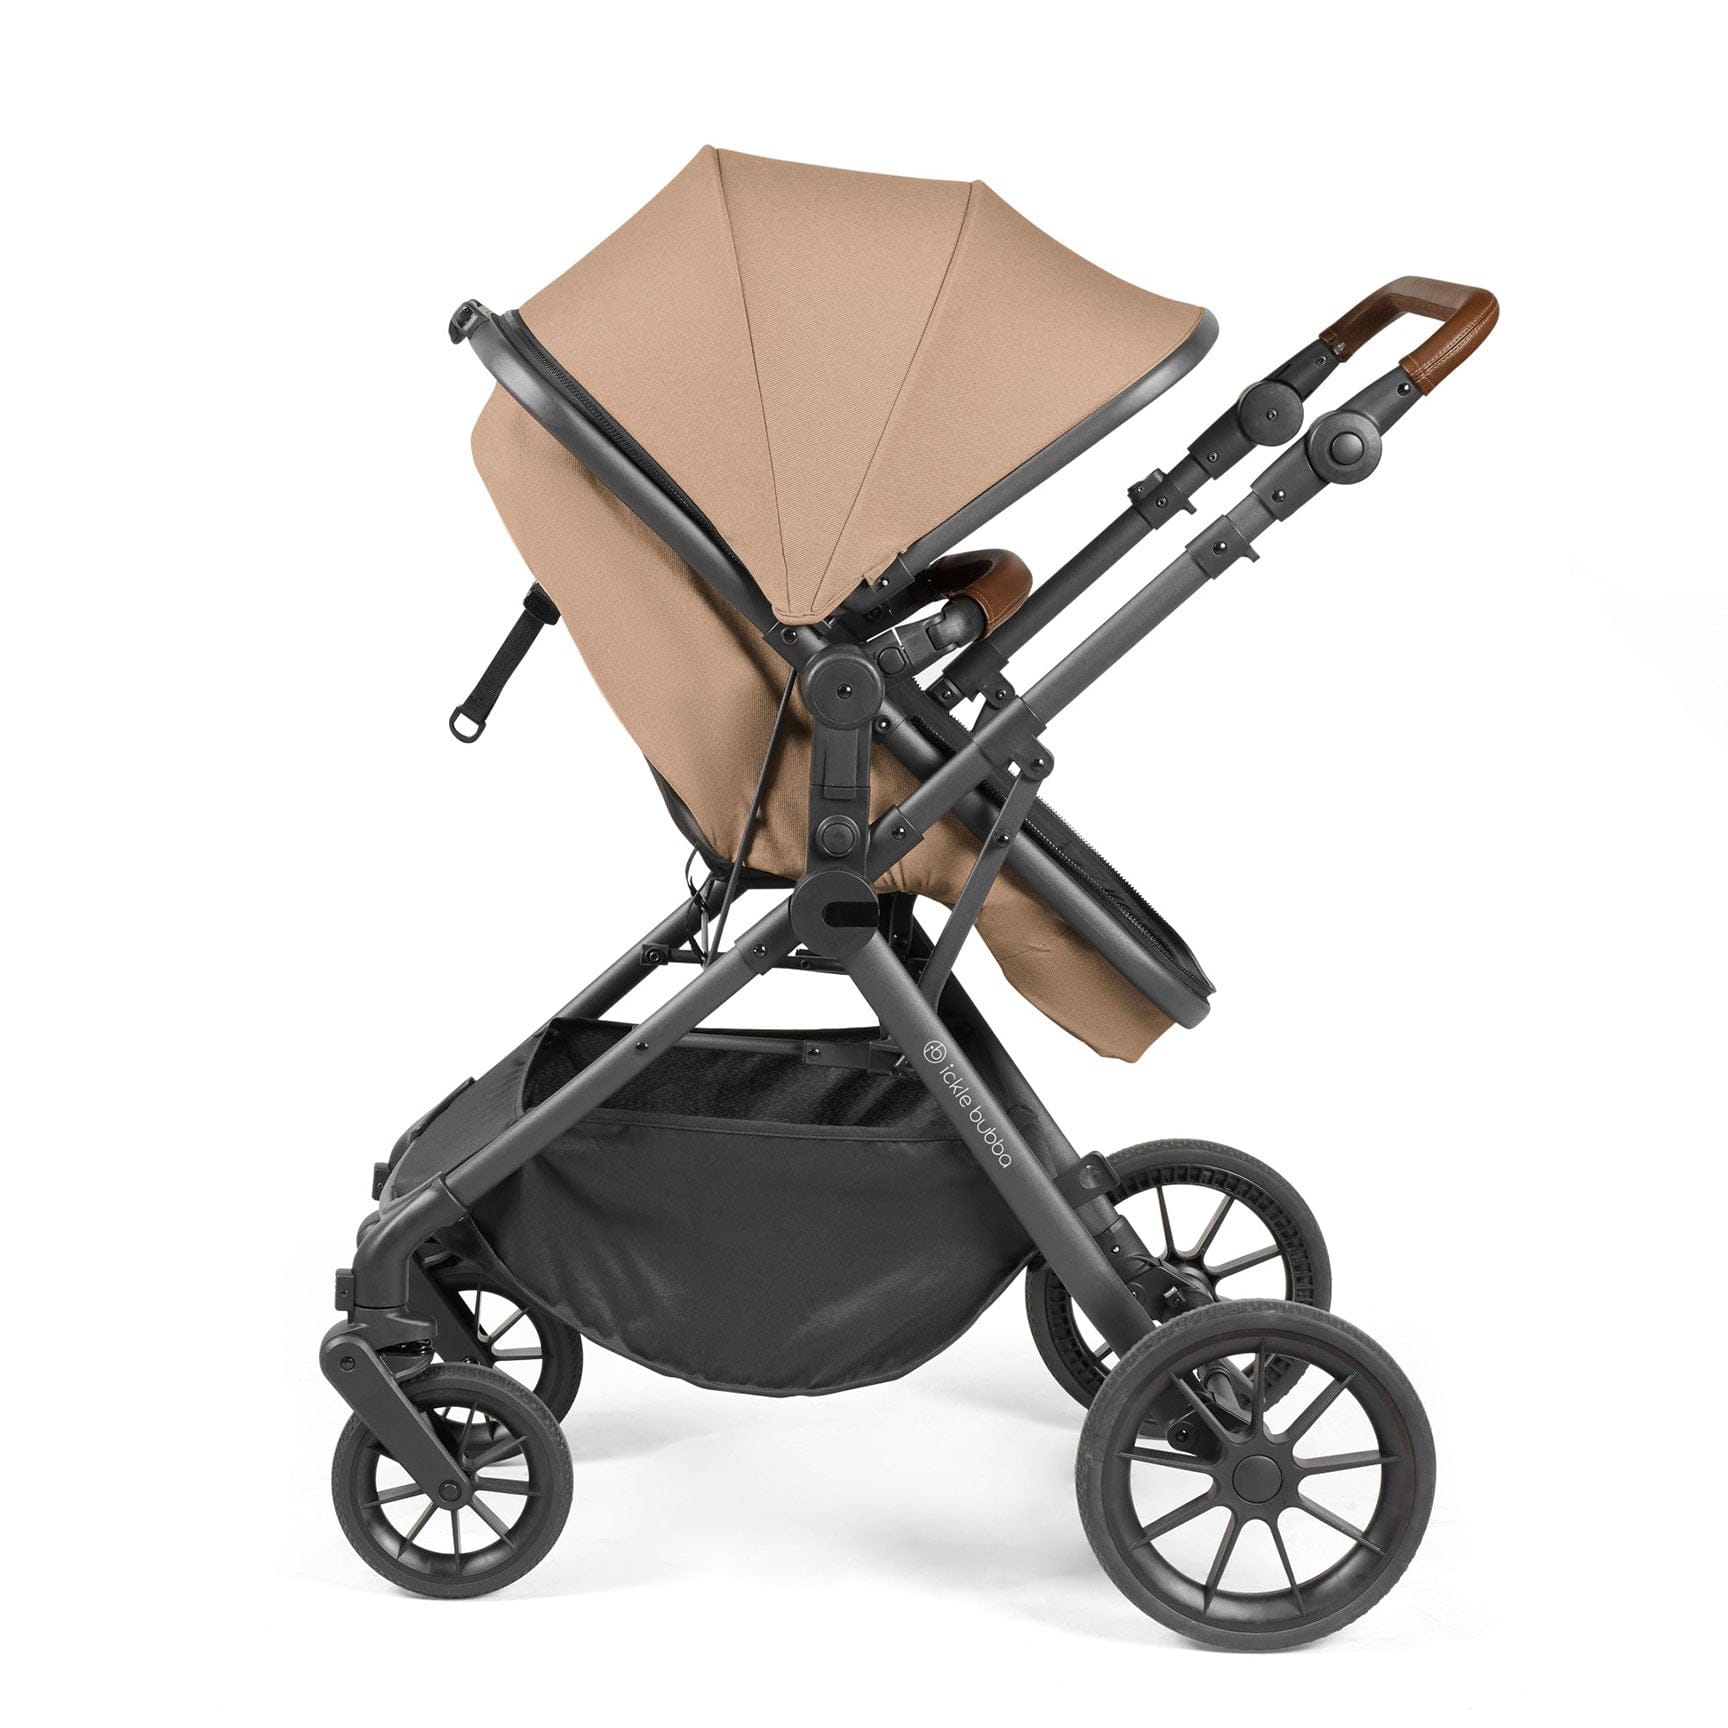 Ickle Bubba travel systems Ickle Bubba Cosmo All-in-One I-Size Travel System with Isofix Base - Desert/Graphite Grey 10-007-300-136